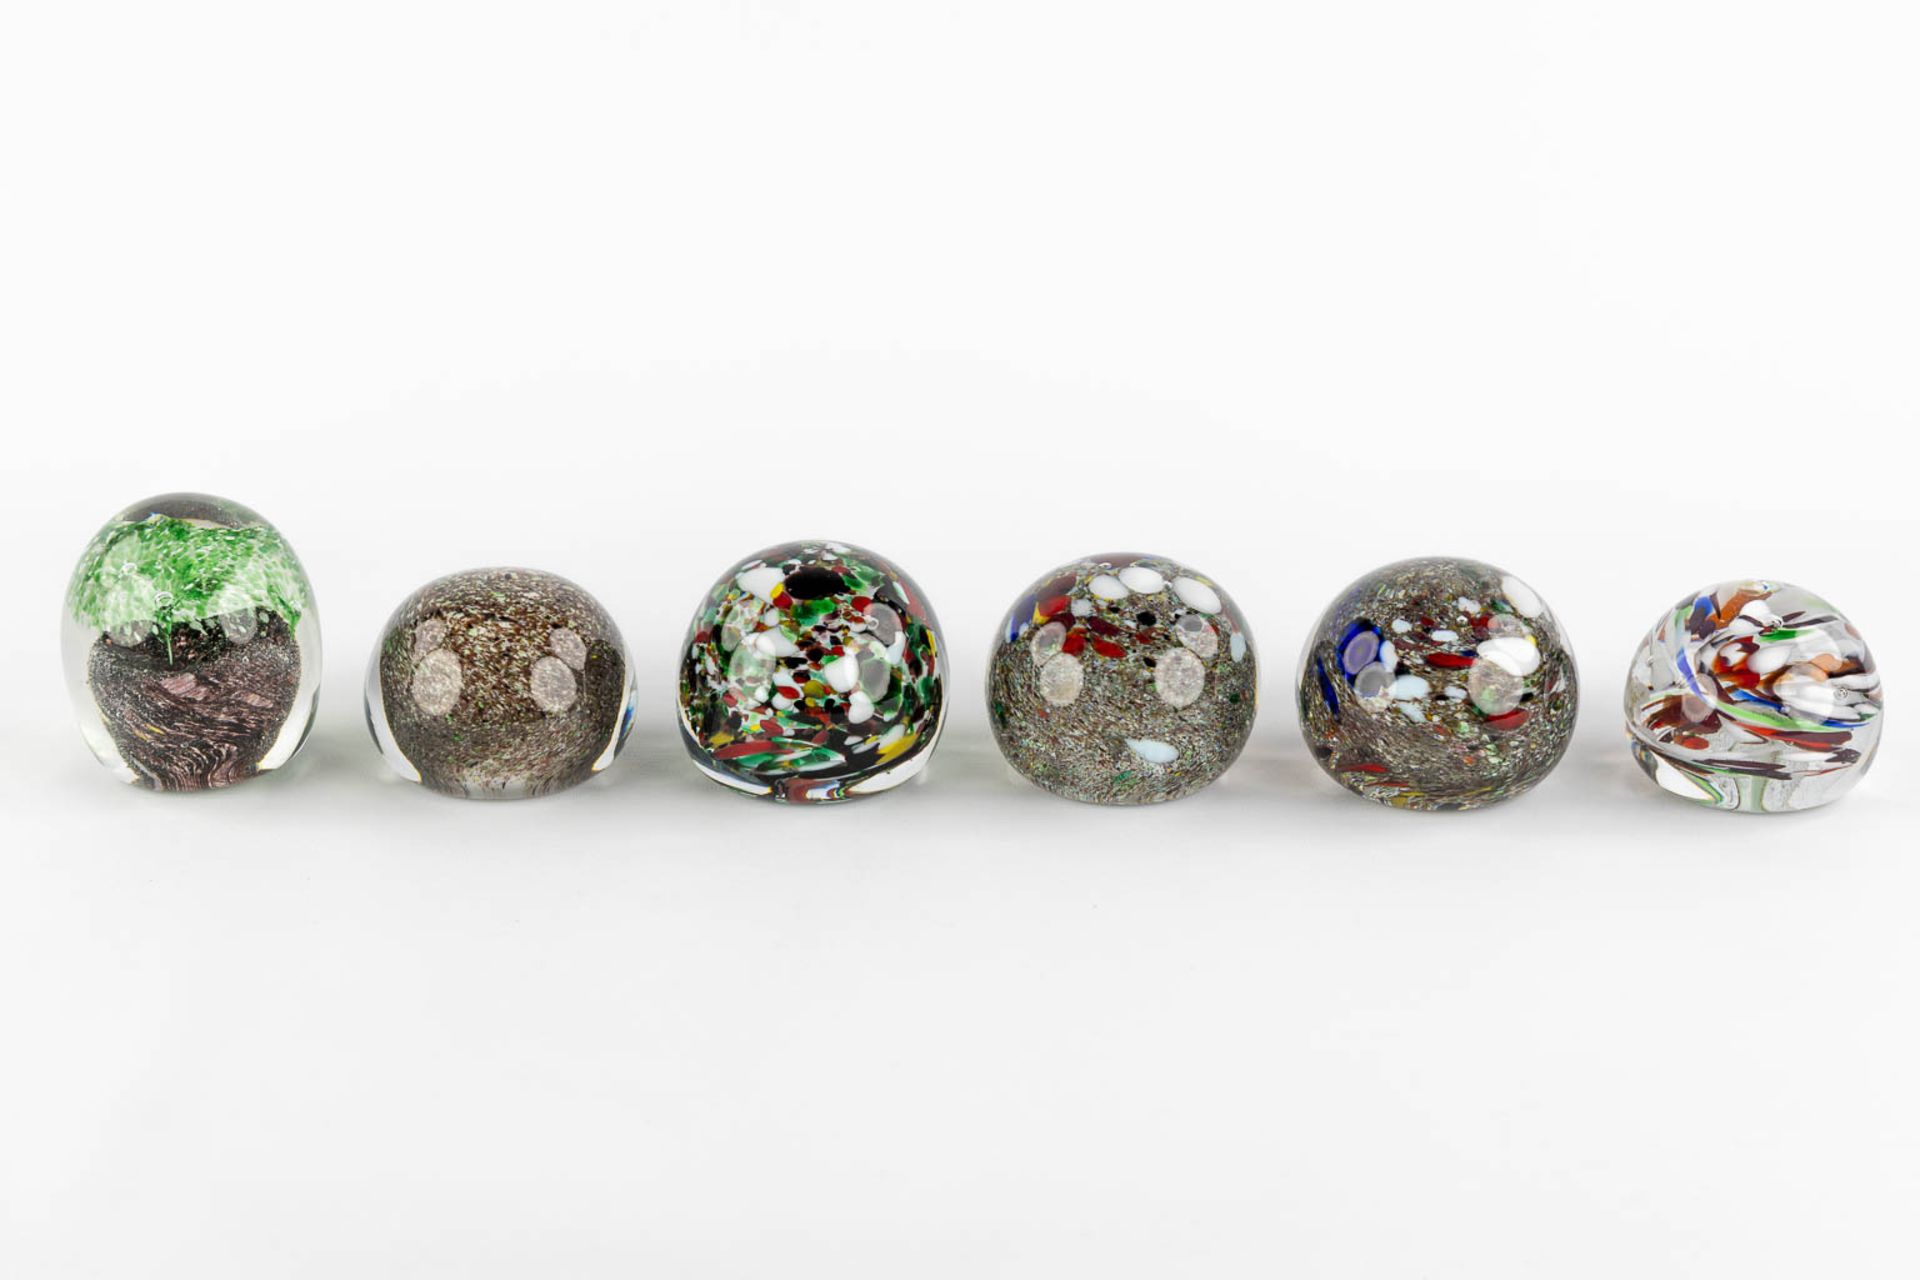 15 paperweights or Presse Papiers, probably made in Murano Italy. (H:8 x D:8 cm) - Bild 8 aus 15